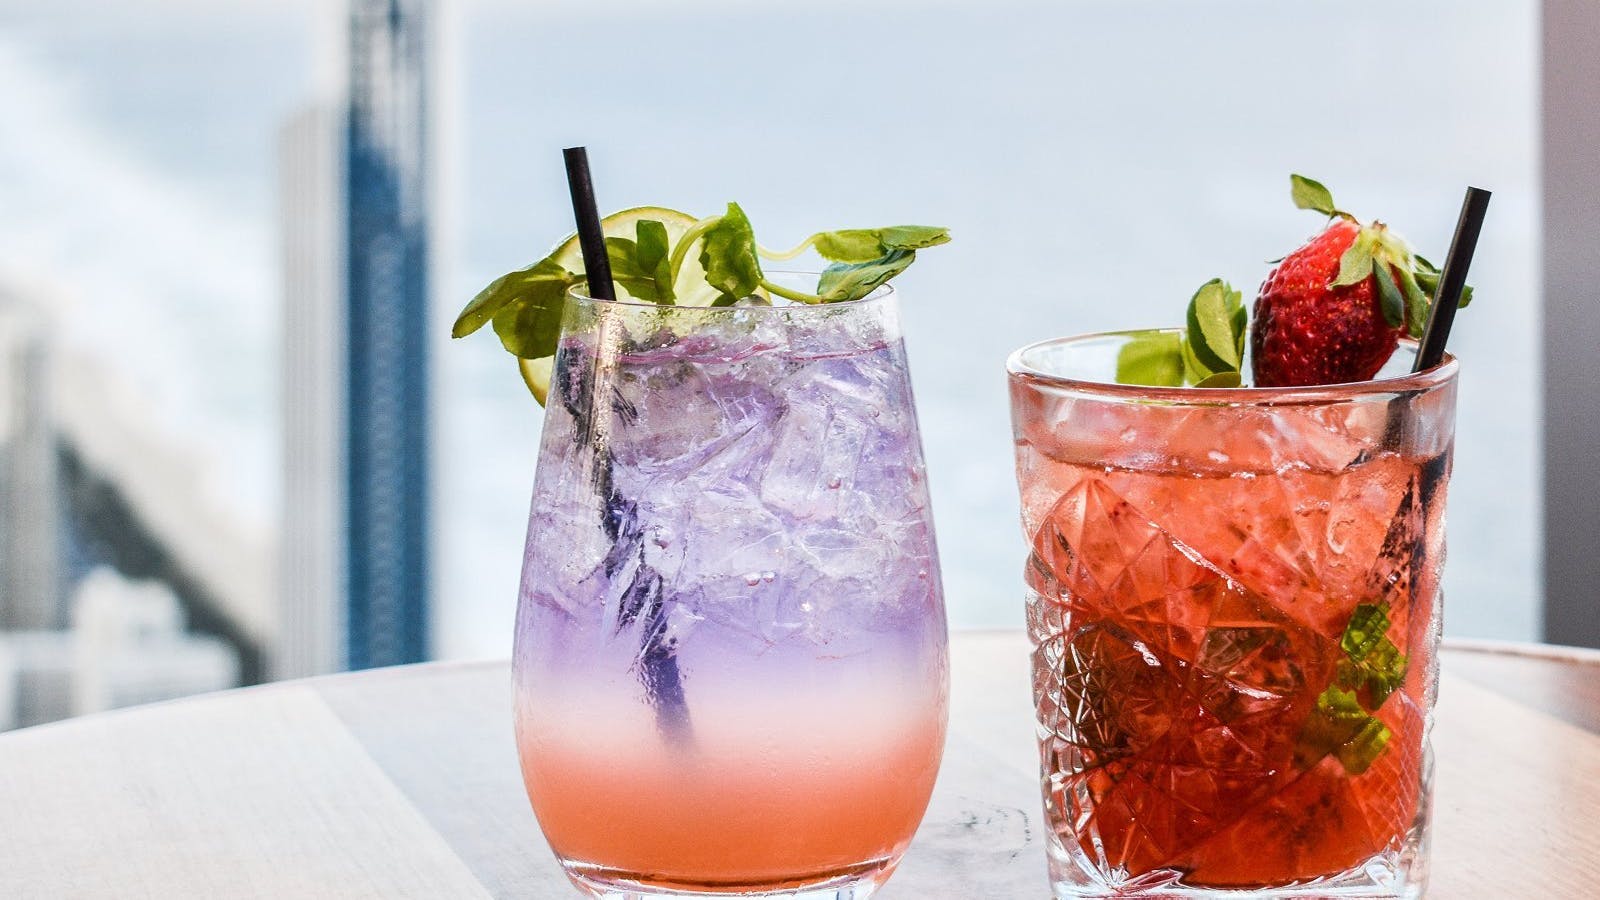 Sip signature cocktails with a view like no other